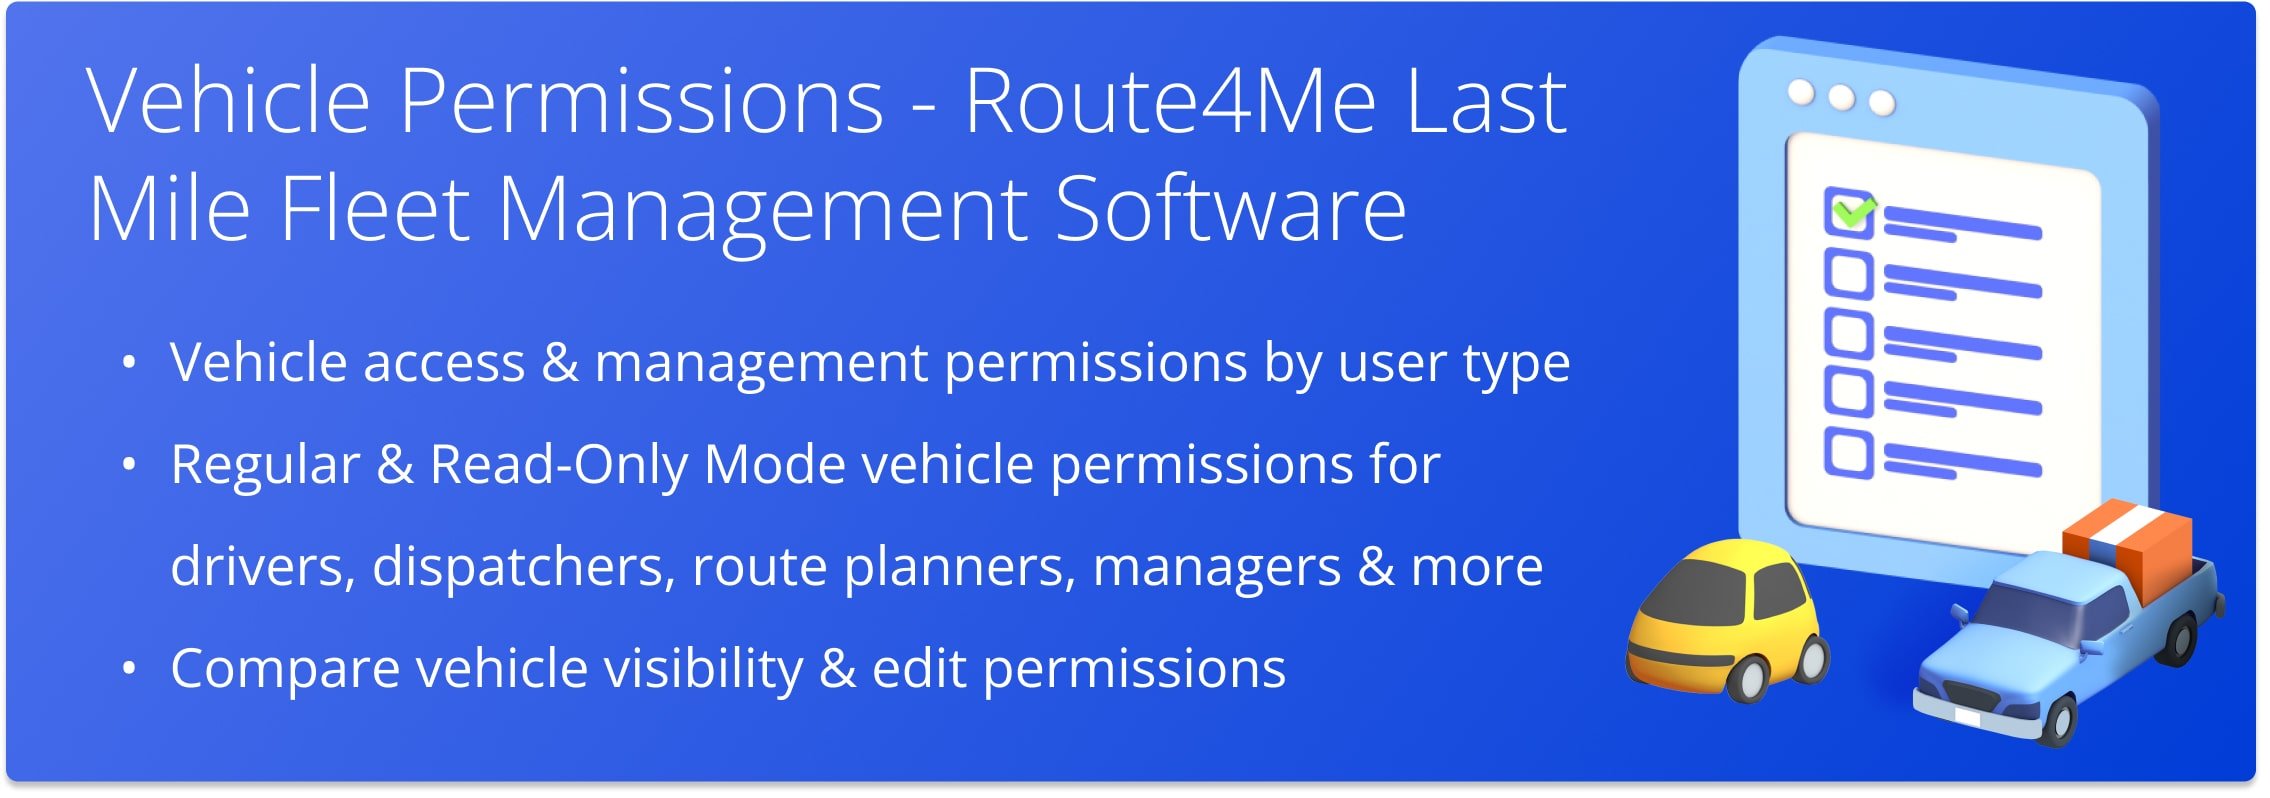 Route4Me access, edit, assign, delete, restore vehicle permissions by user type.